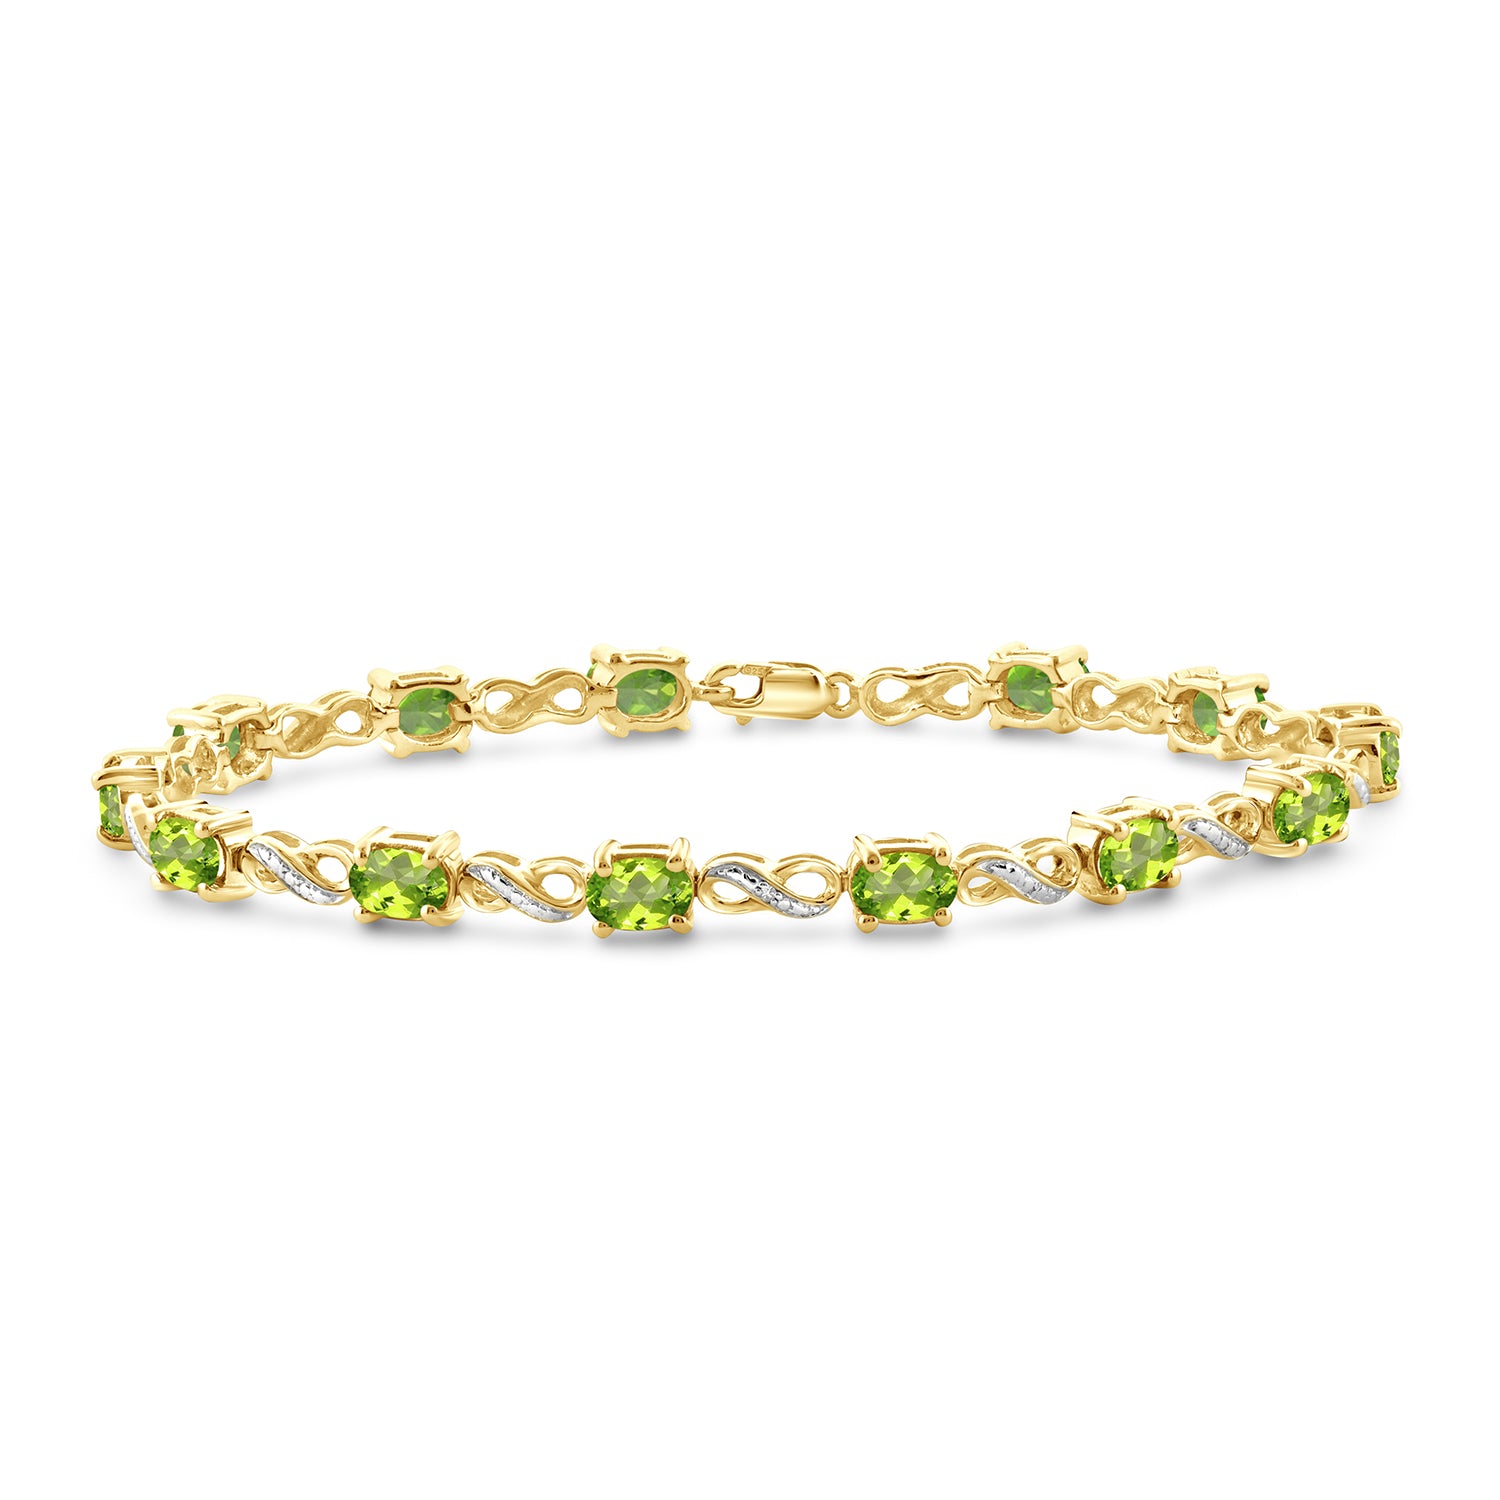 6 1/4 Carat T.G.W. Peridot And White Diamond Accent 14K Gold-Plated Bracelet